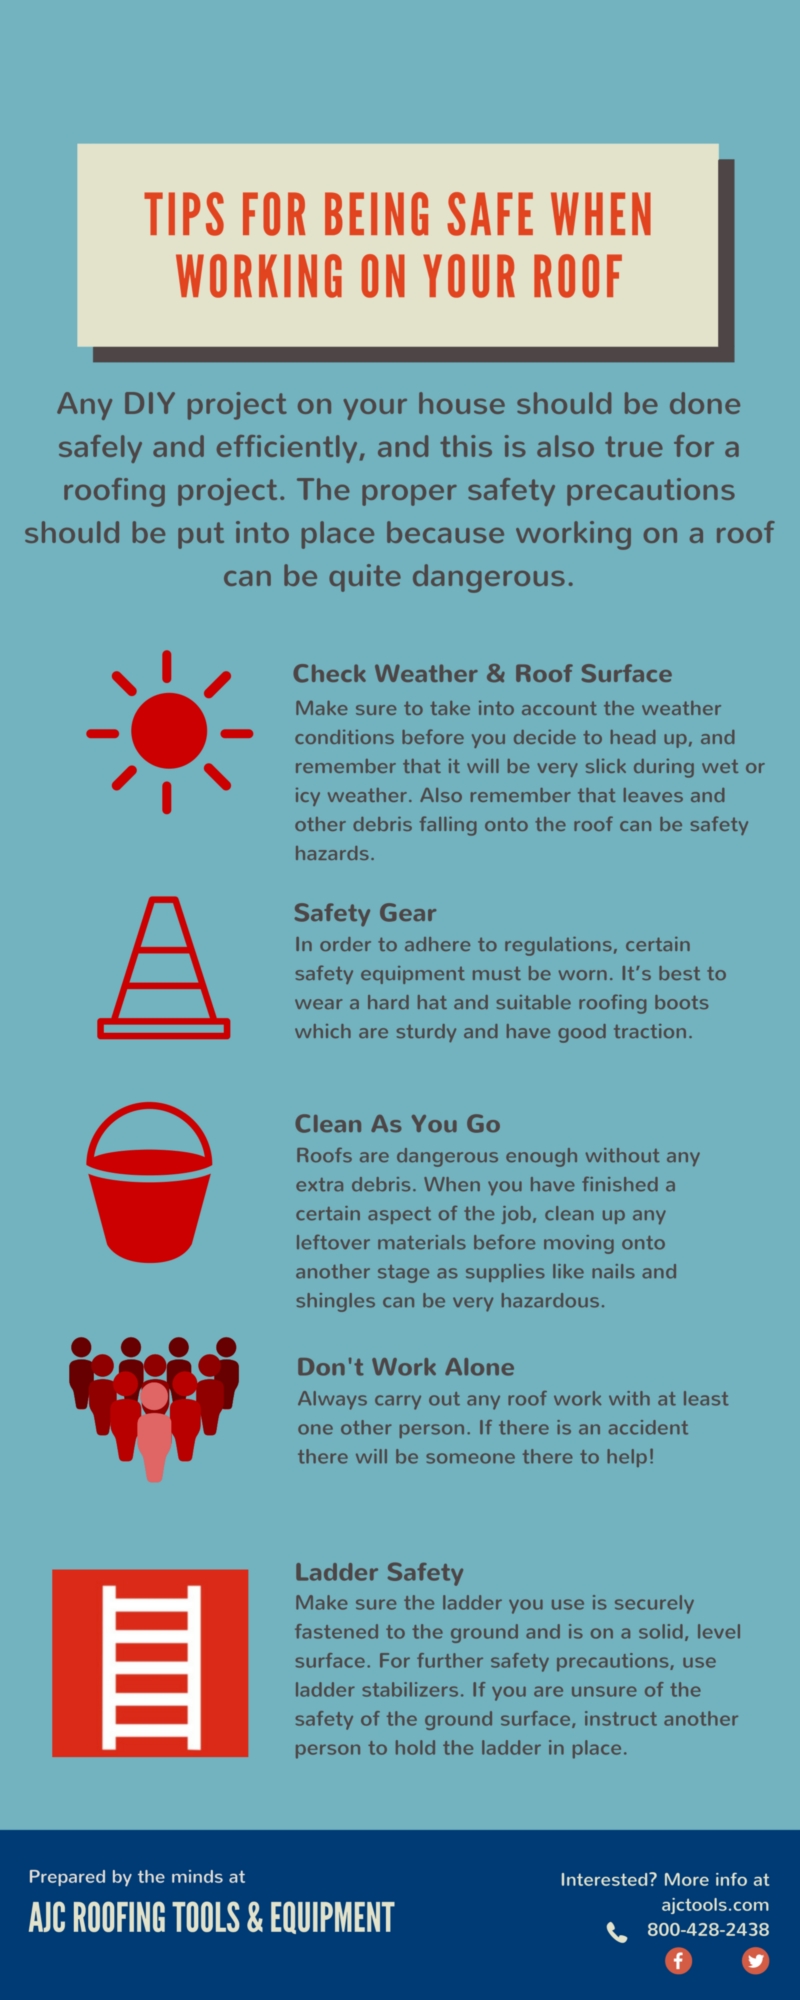 Roof Safety Tips  View Our Blog For Roof Safety Gear Ideas & Roofing Safety  Tips - AJC Tools & Equipment